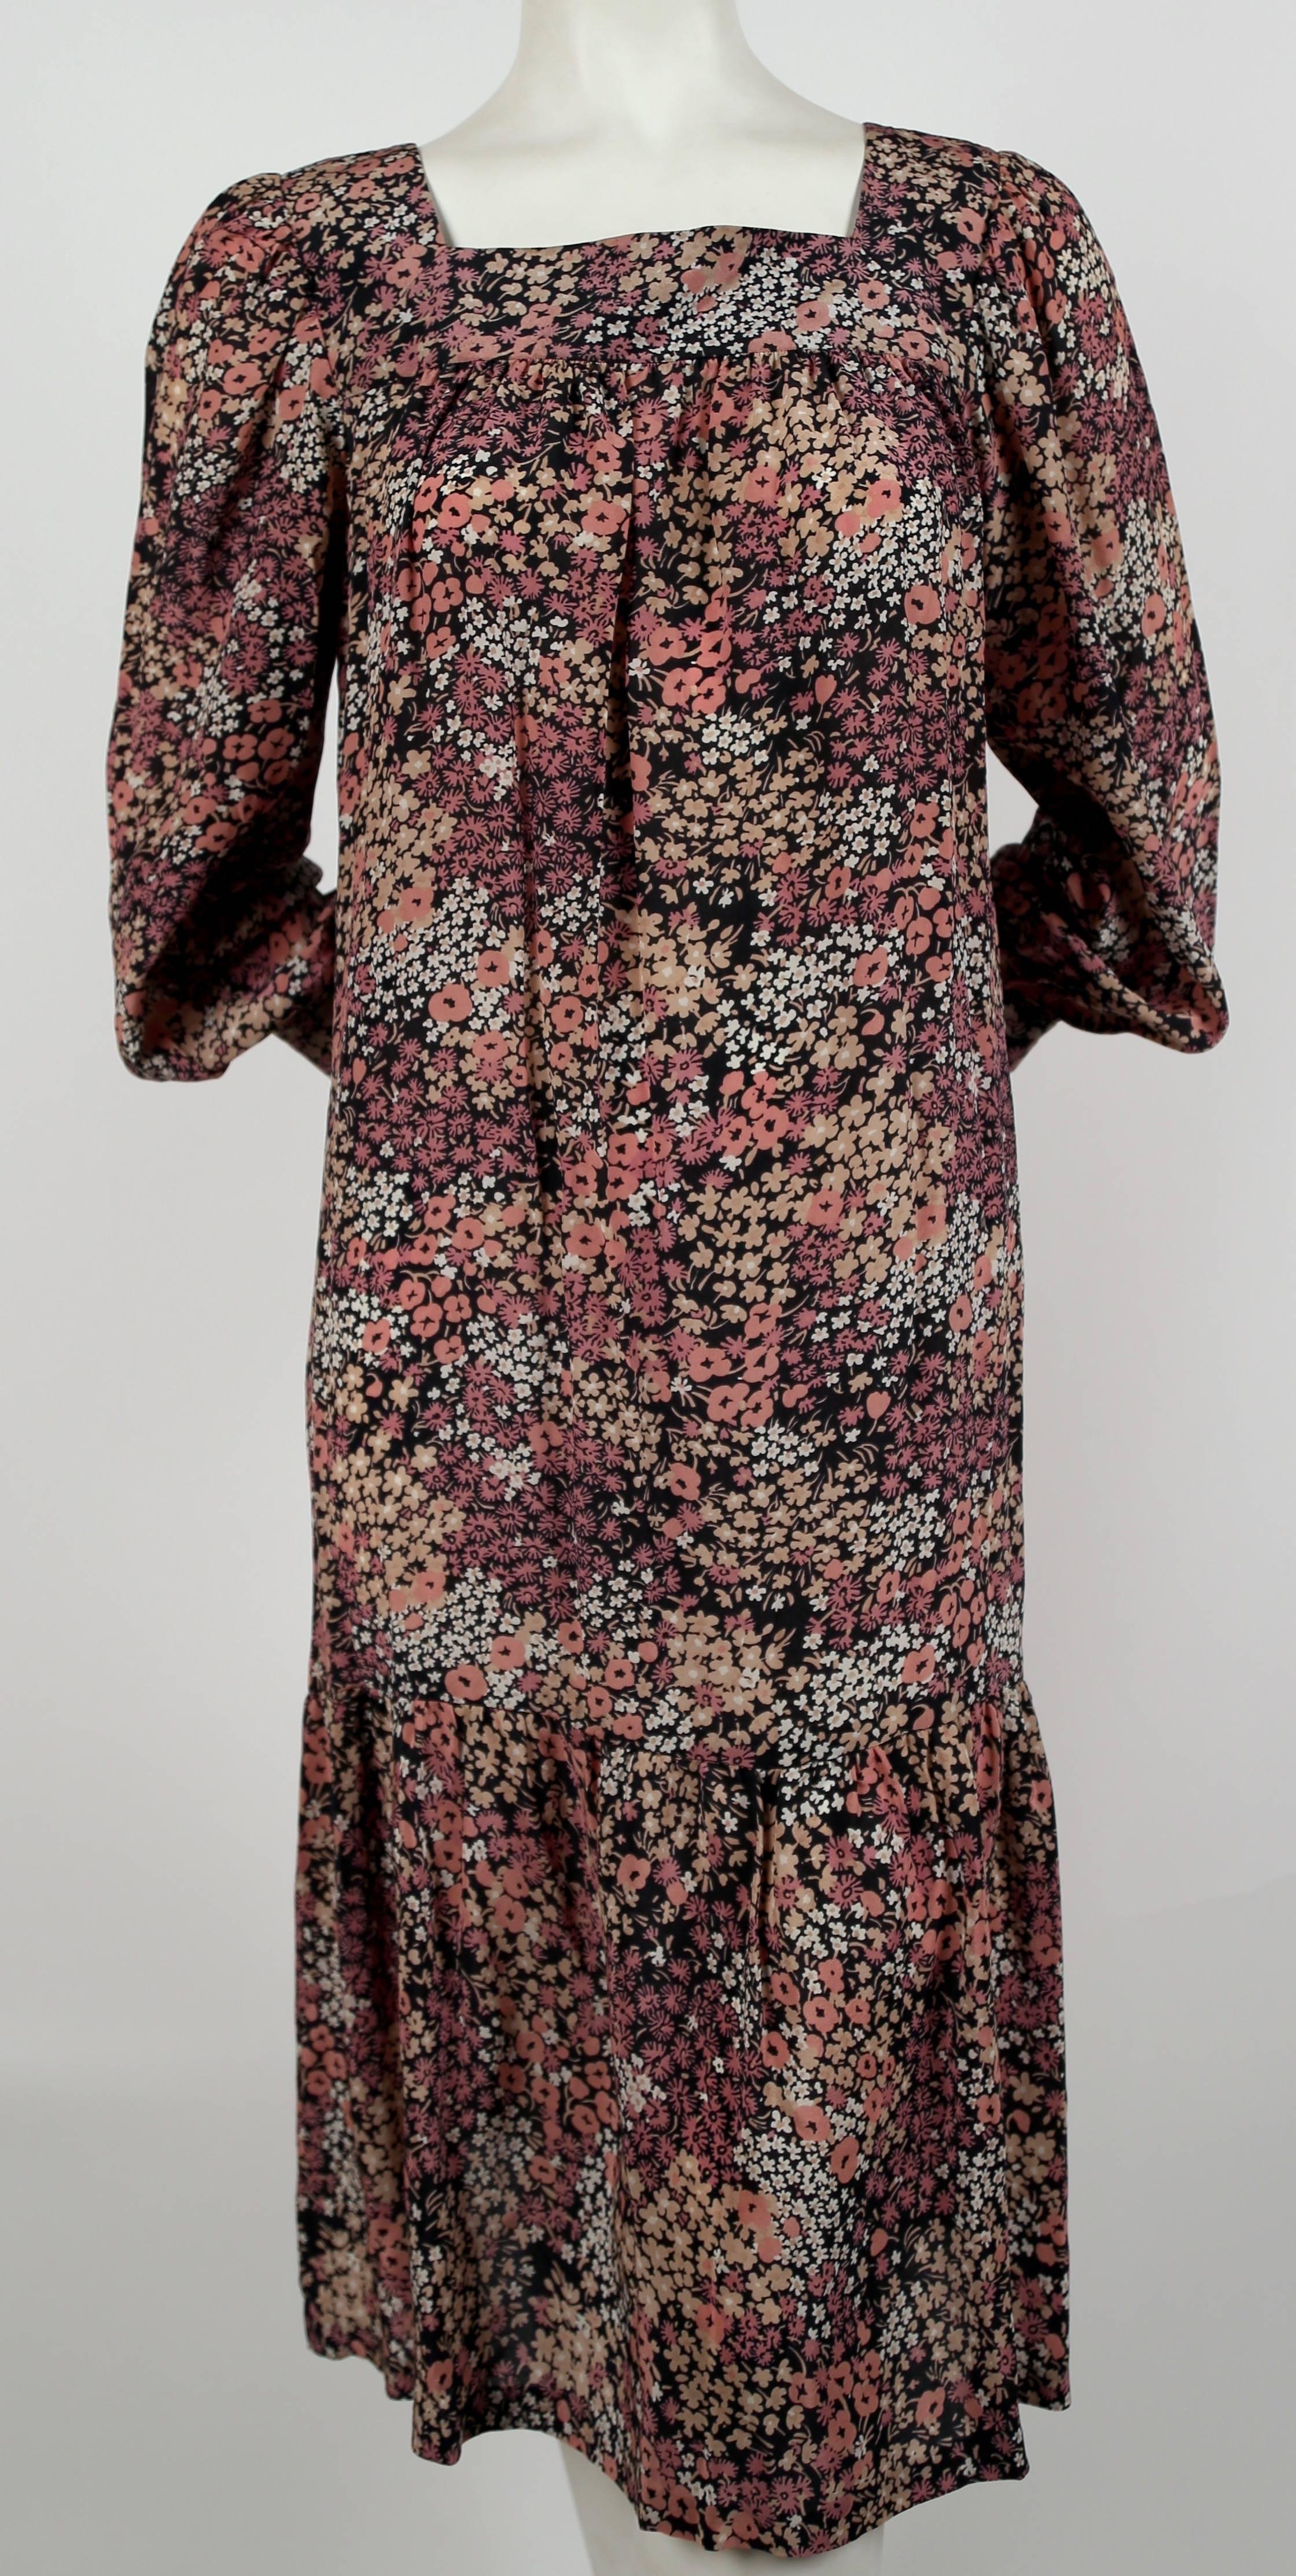 Floral printed silk peasant dress designed by Saint Laurent dating to the 1970's. French size 36. Approximate measurements: shoulder 13.5", bust up to 40", hips up to 42", arm length 24.5" and overall length 42". Button